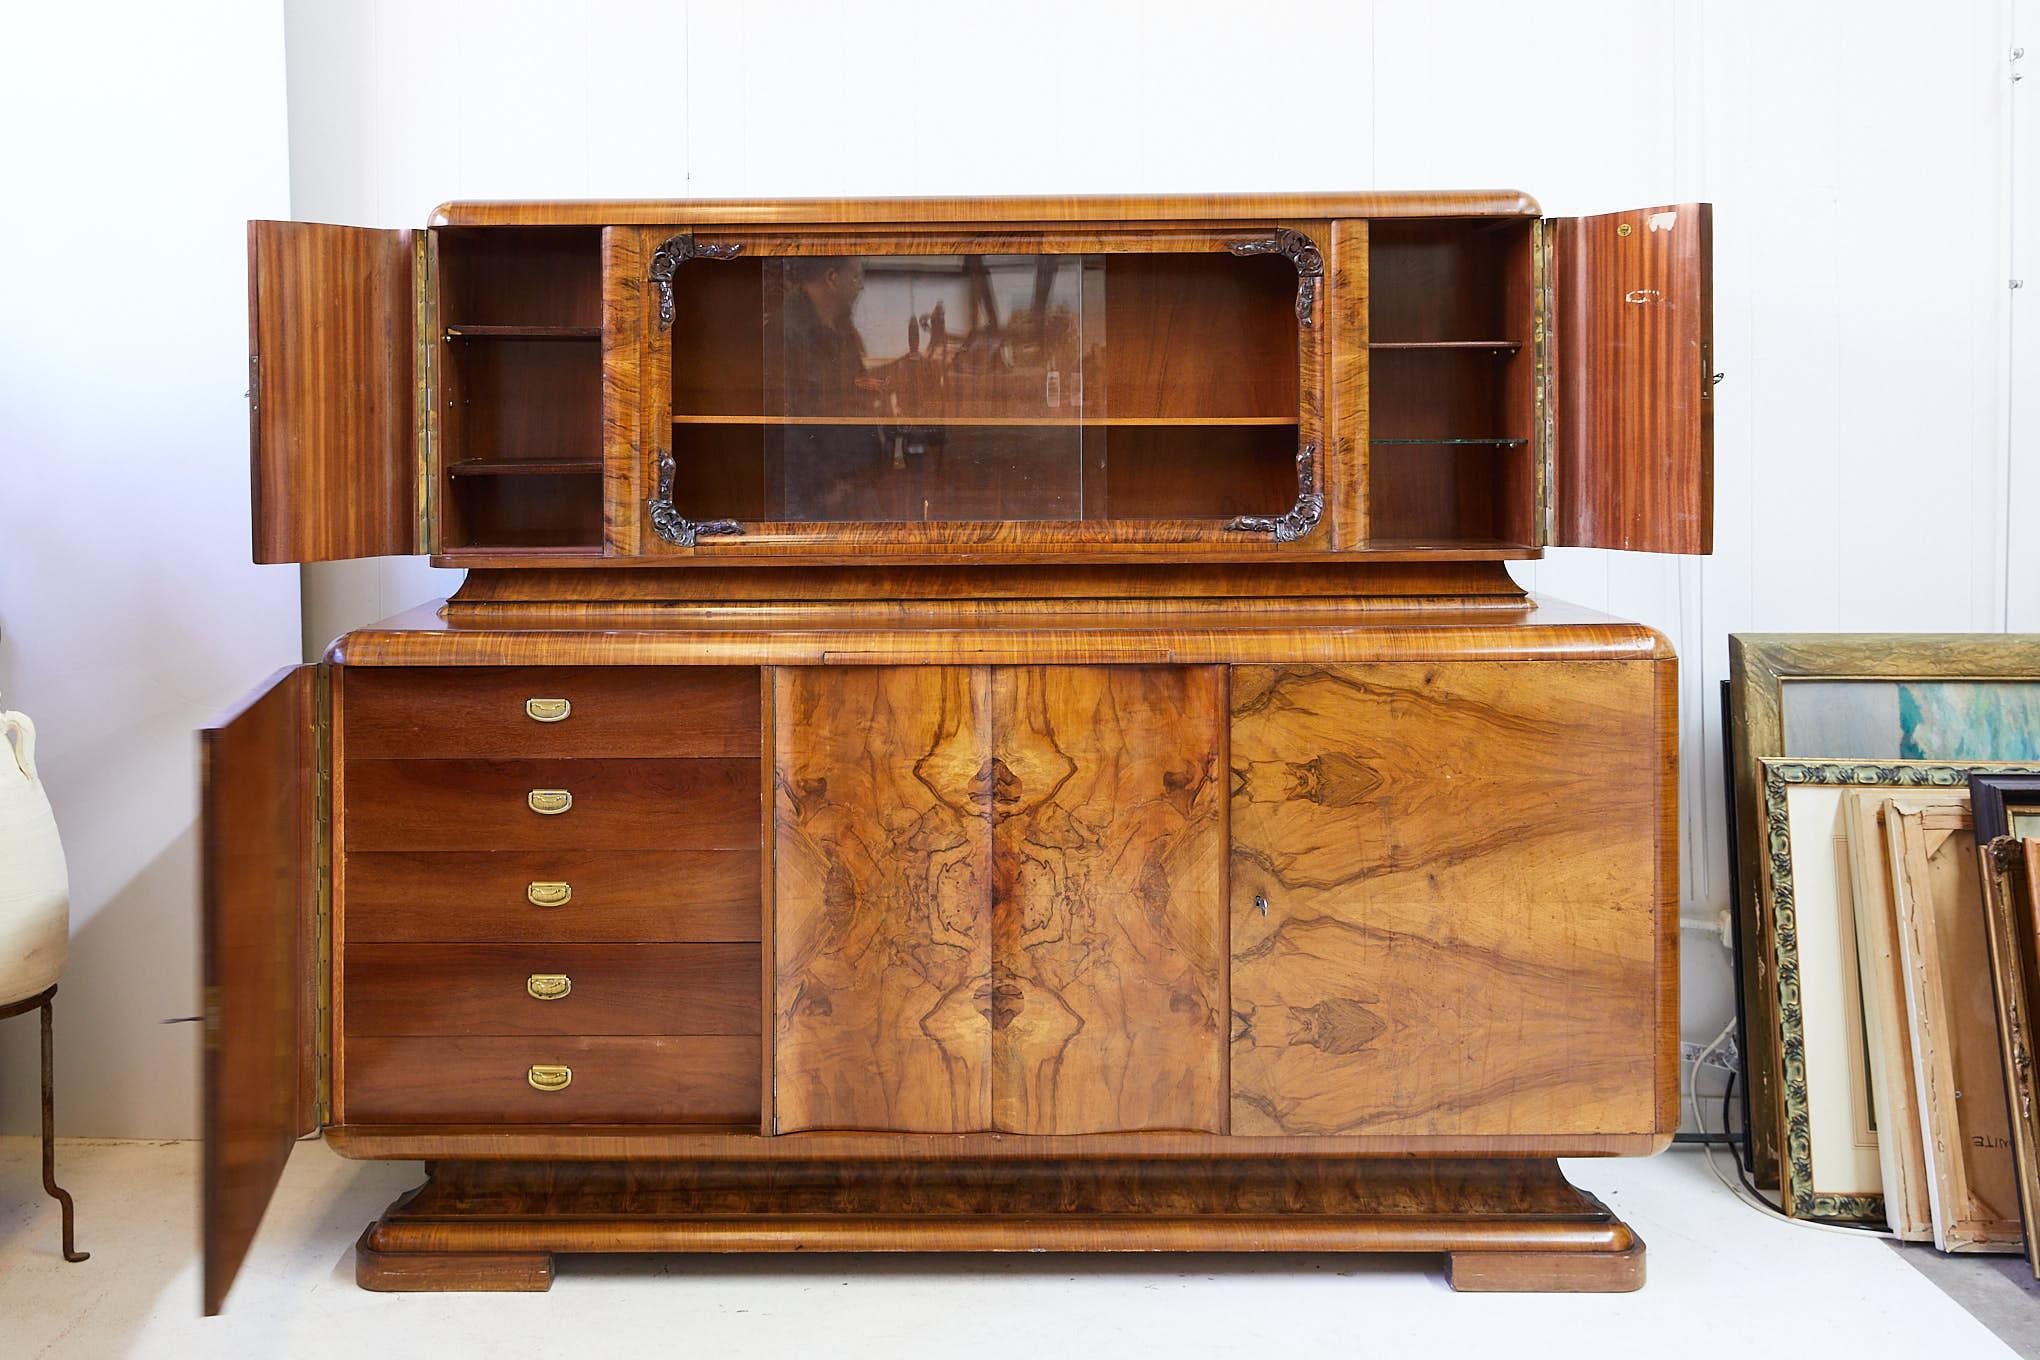 Early 20th century German Art Deco period buffet with upper bar cabinet. An upper bar cabinet features a display behind sliding glass doors and is framed by decorative carved corner moldings. This is flanked by bookmatched burl walnut veneered doors